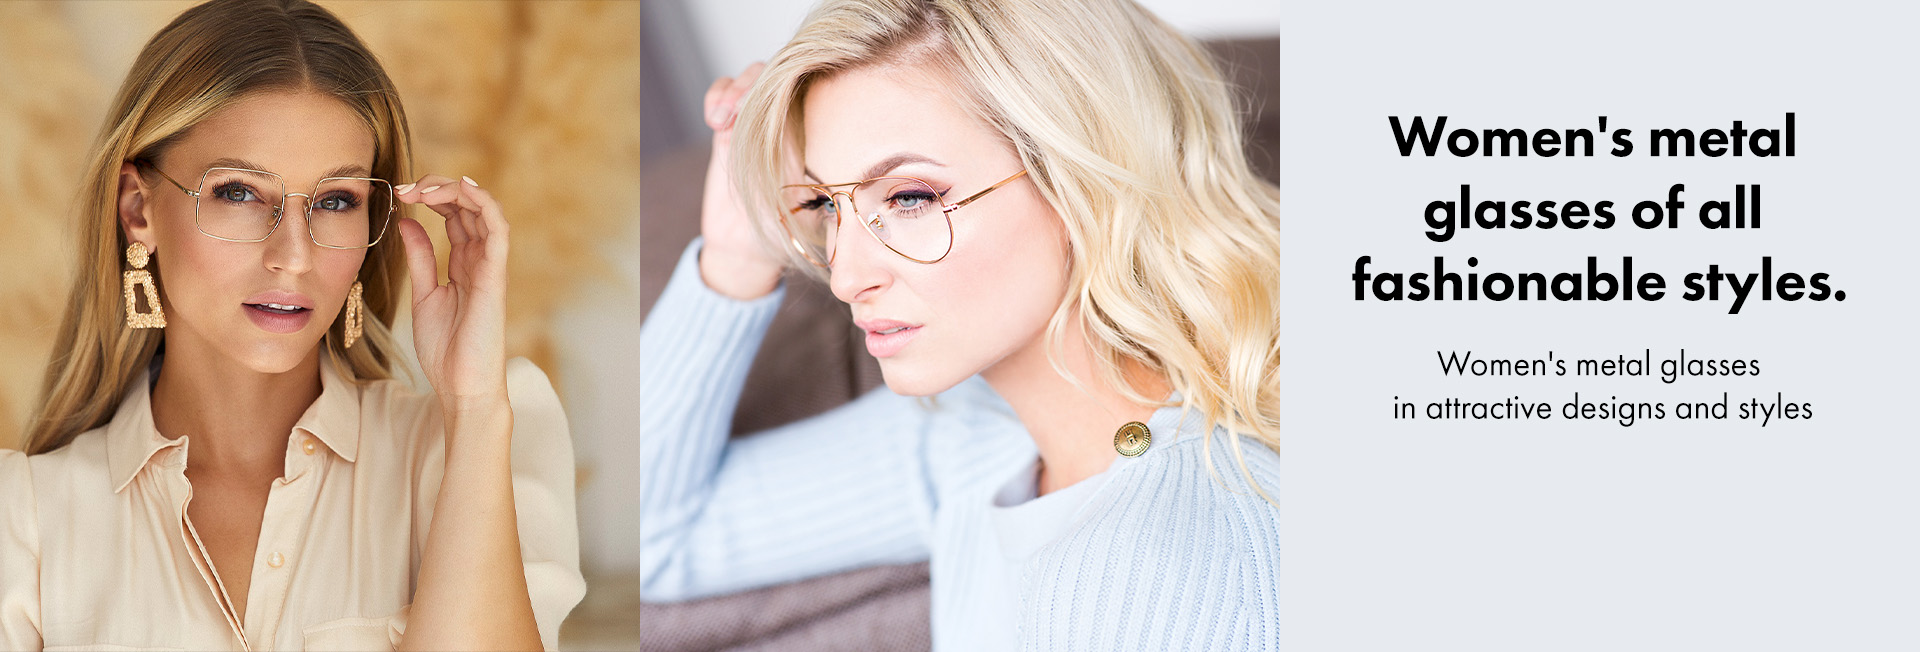 Women's metal glasses of all fashionable styles